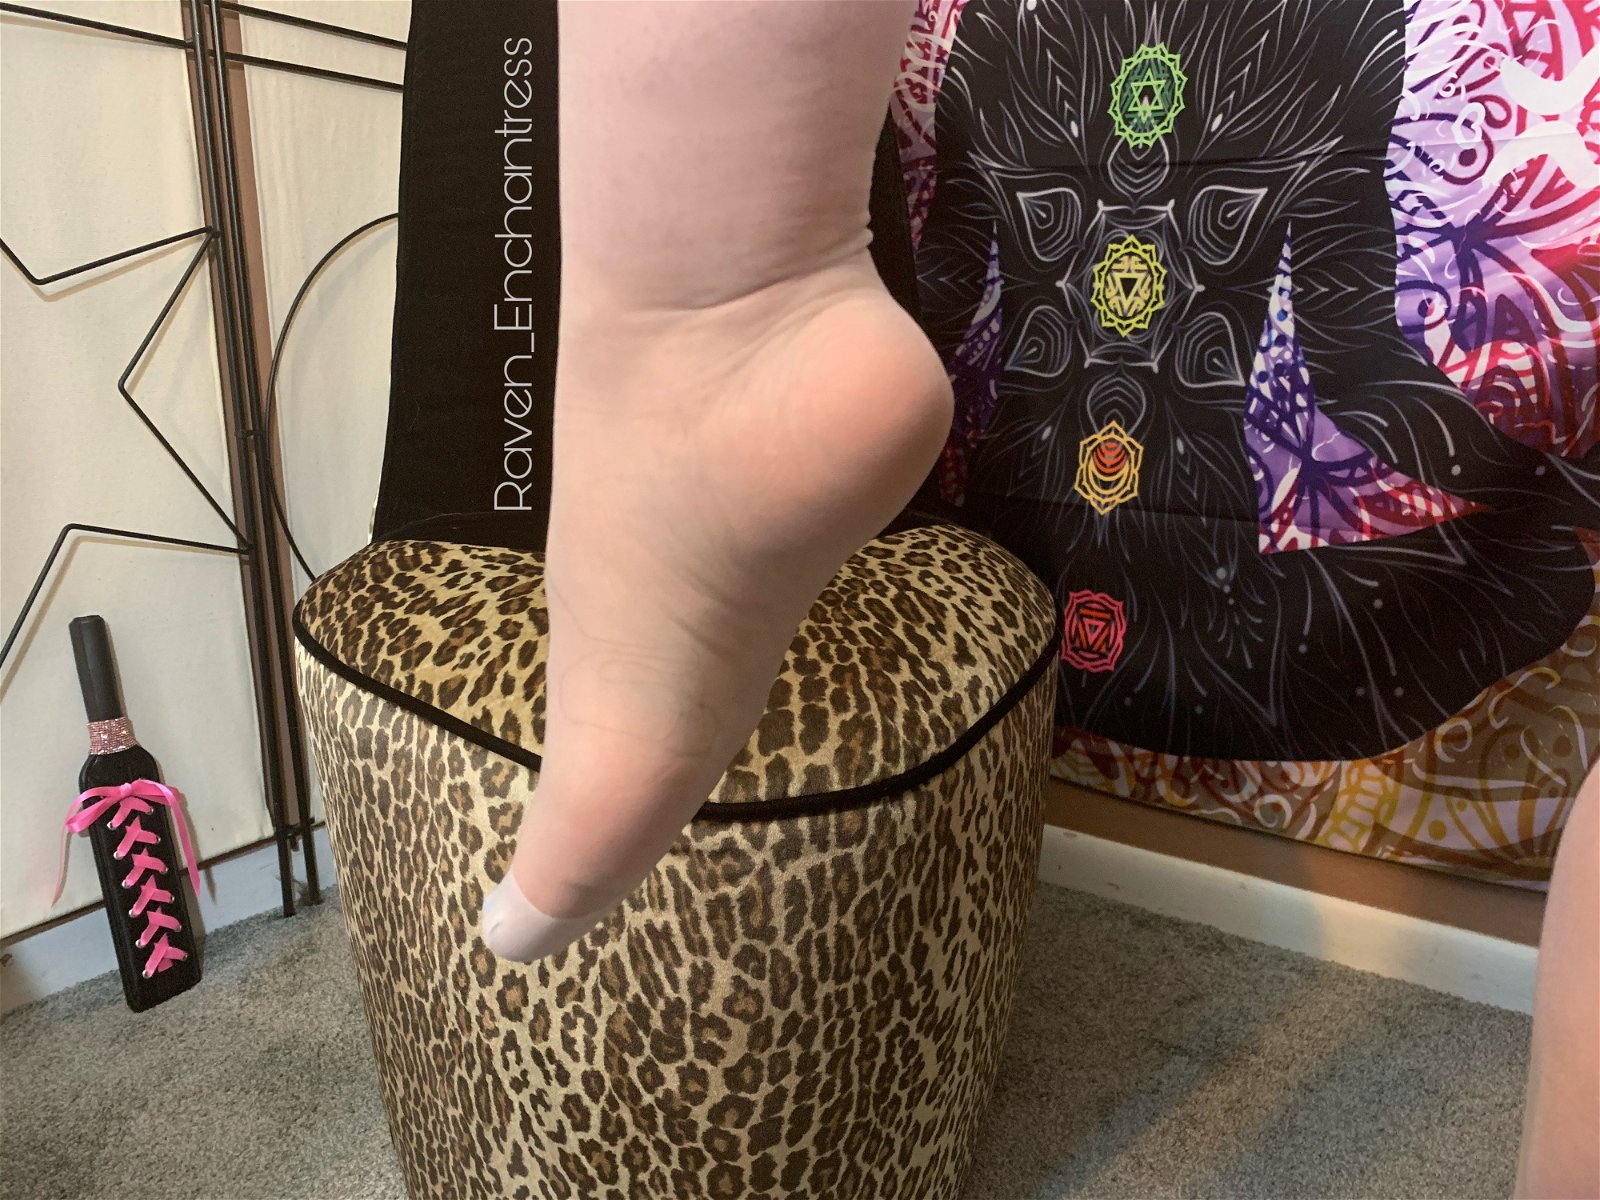 Photo by Raven_Enchantress with the username @curvyraven, who is a star user,  March 21, 2020 at 4:43 PM. The post is about the topic Stockings and the text says 'dipping my toes into spring. XOXO how are you spending your day?

https://raven_enchantress.manyvids.com/

#feet #feetinstockings #stockings #footfetish
#legs #sexylegs'